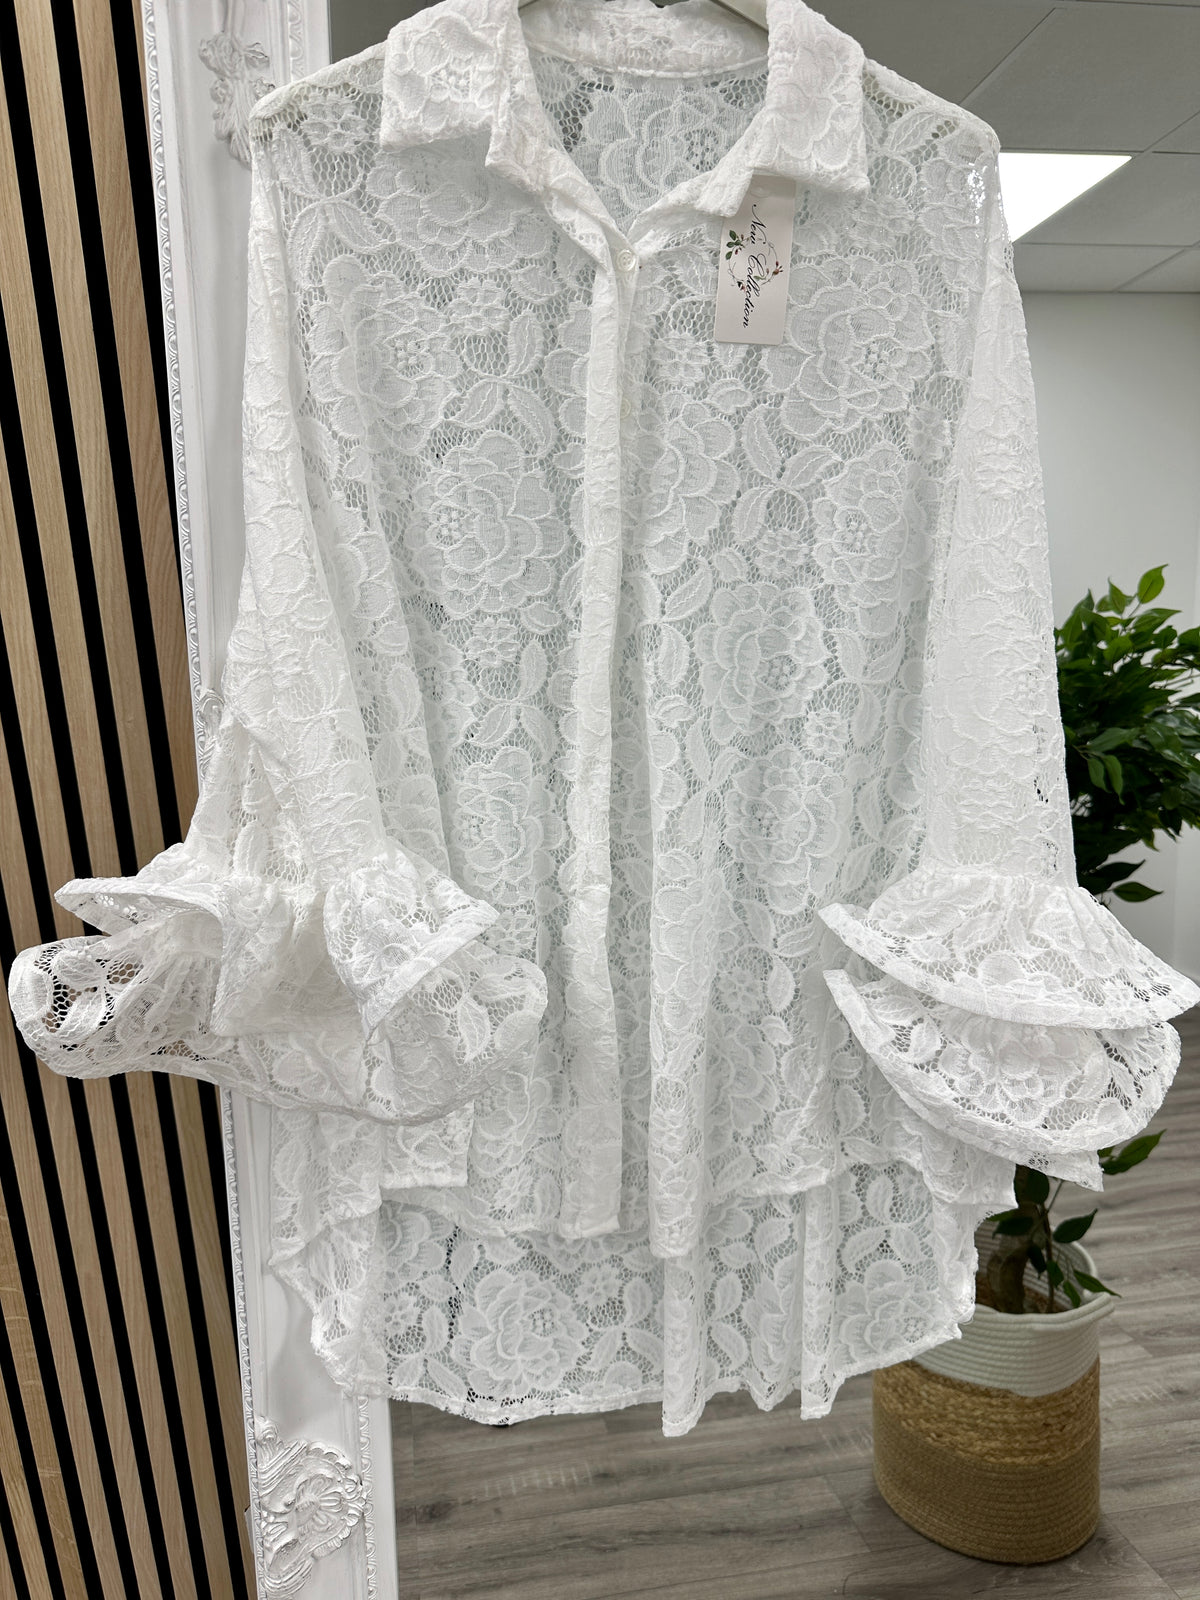 The Flute Sleeve  Lace Shirt - White